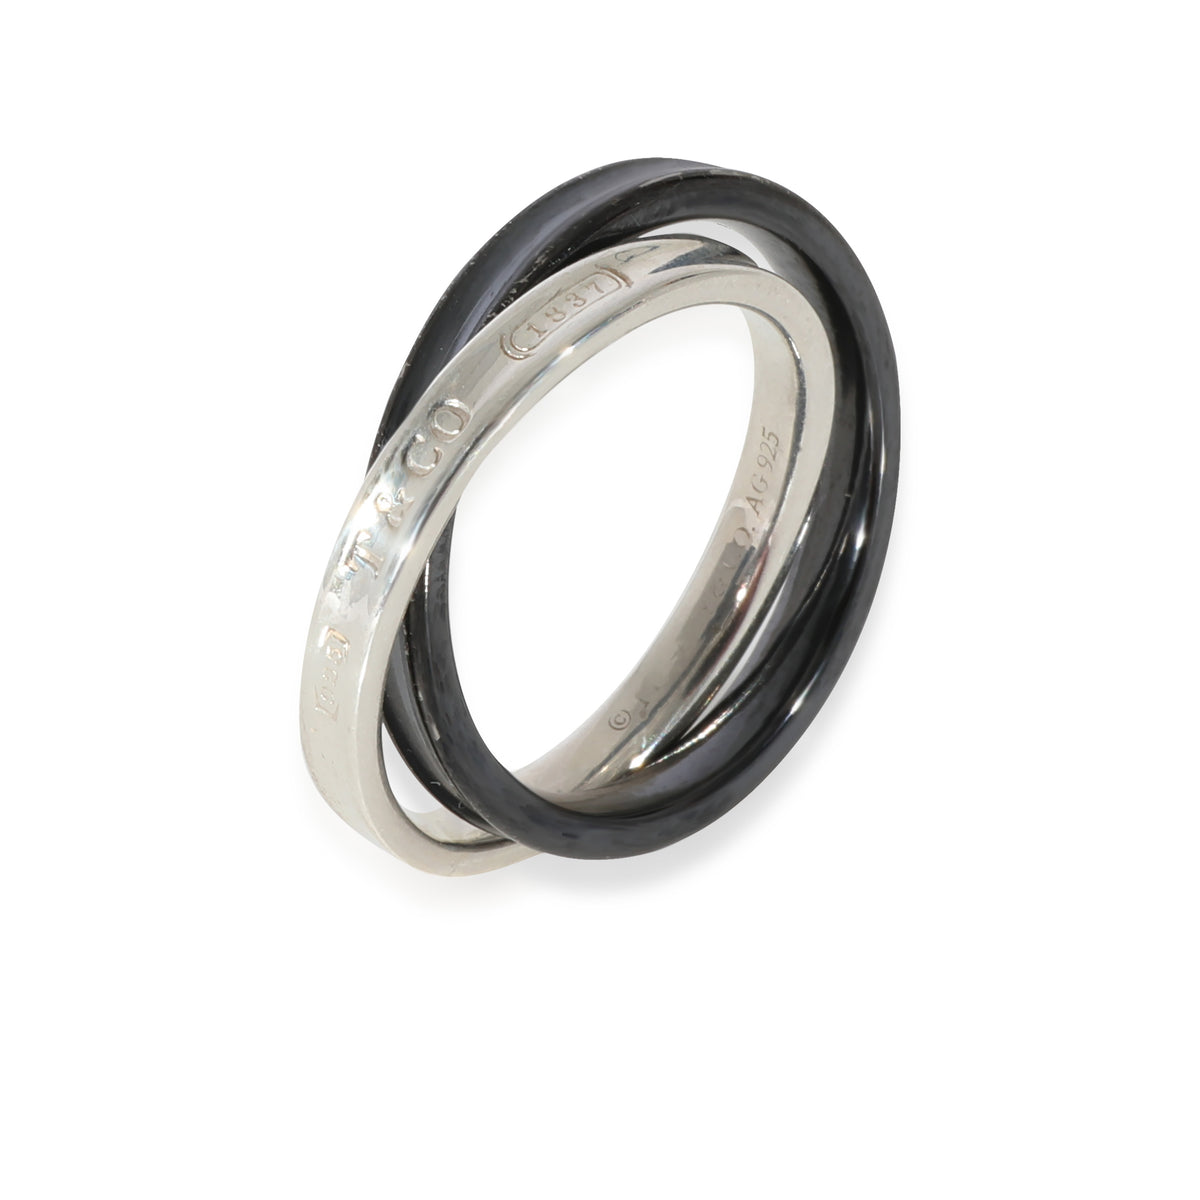 Tiffany & Co. 1837 Ring in Sterling Silver & Titanium